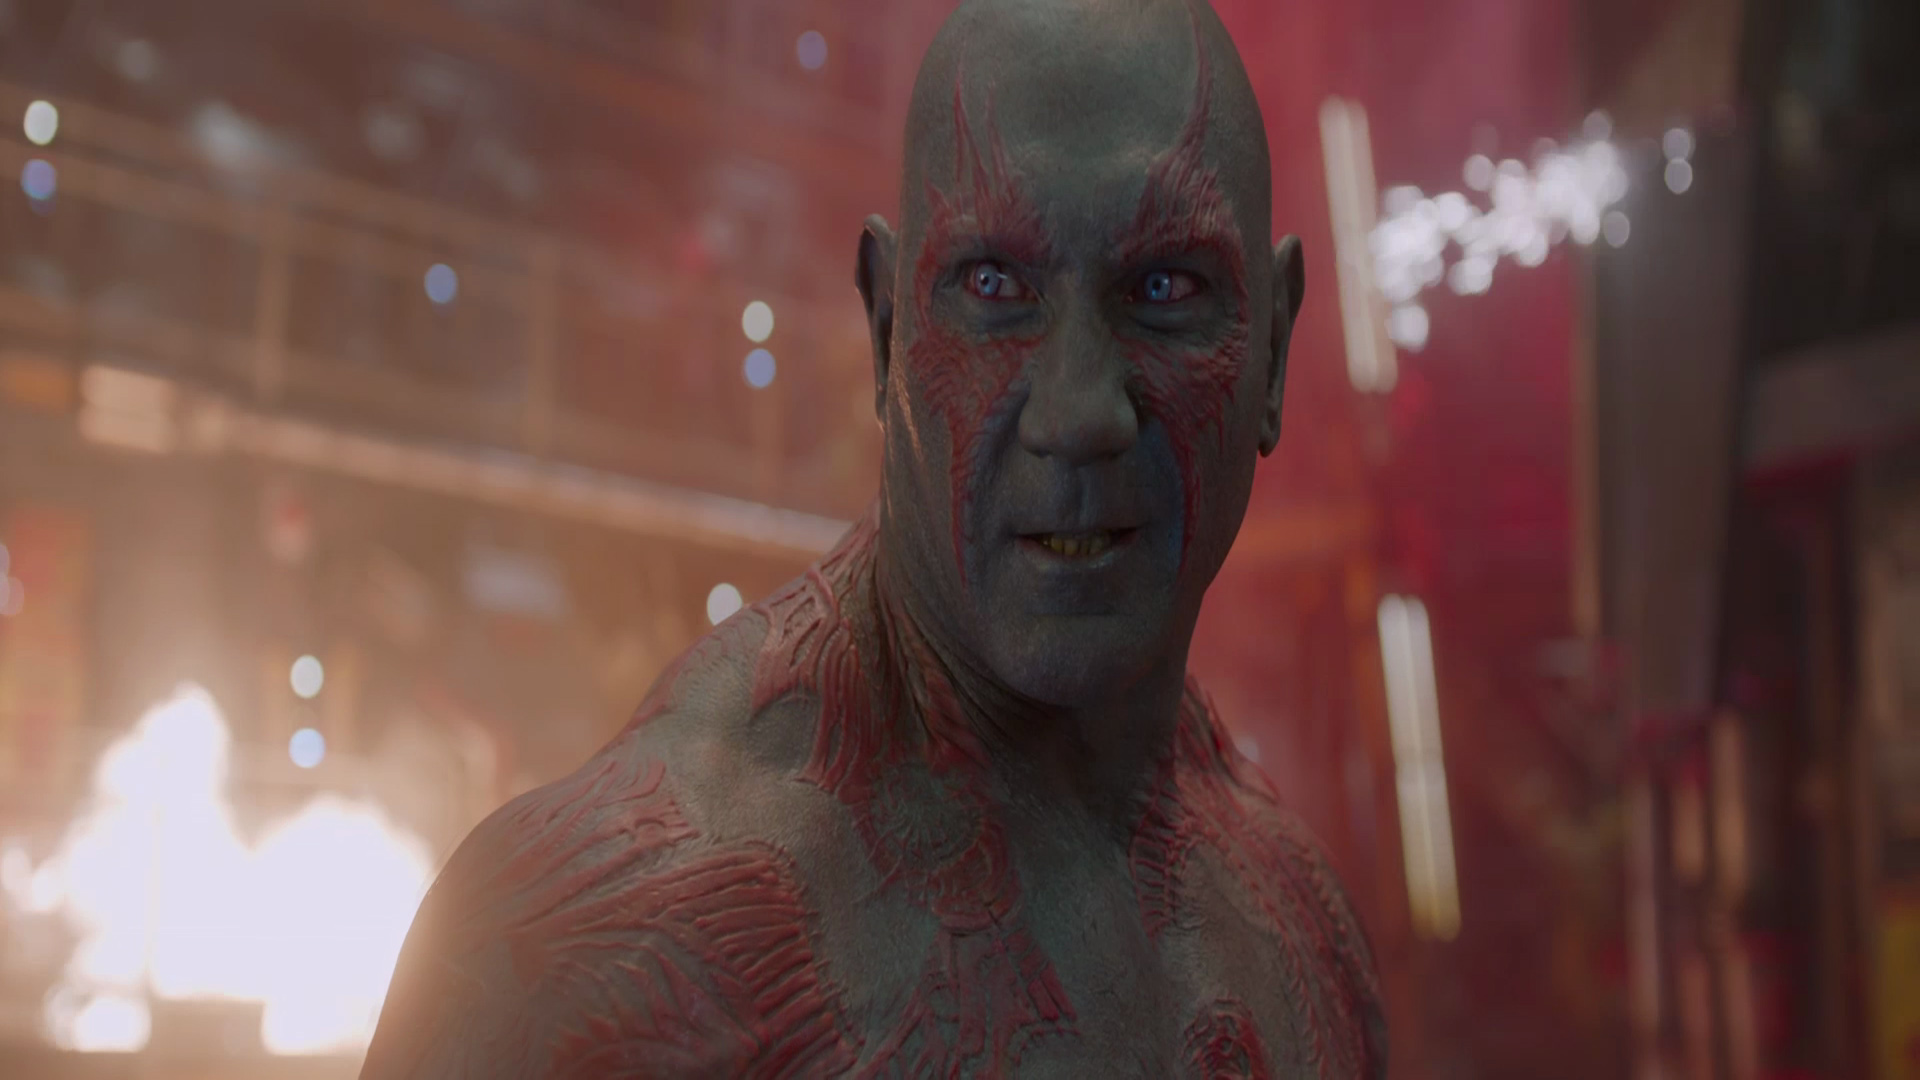 Wallpaper  1920x1080 px Drax the Destroyer Gamora Groot Guardians of  the Galaxy movies Rocket Raccoon Star Lord 1920x1080  CoolWallpapers   664520  HD Wallpapers  WallHere